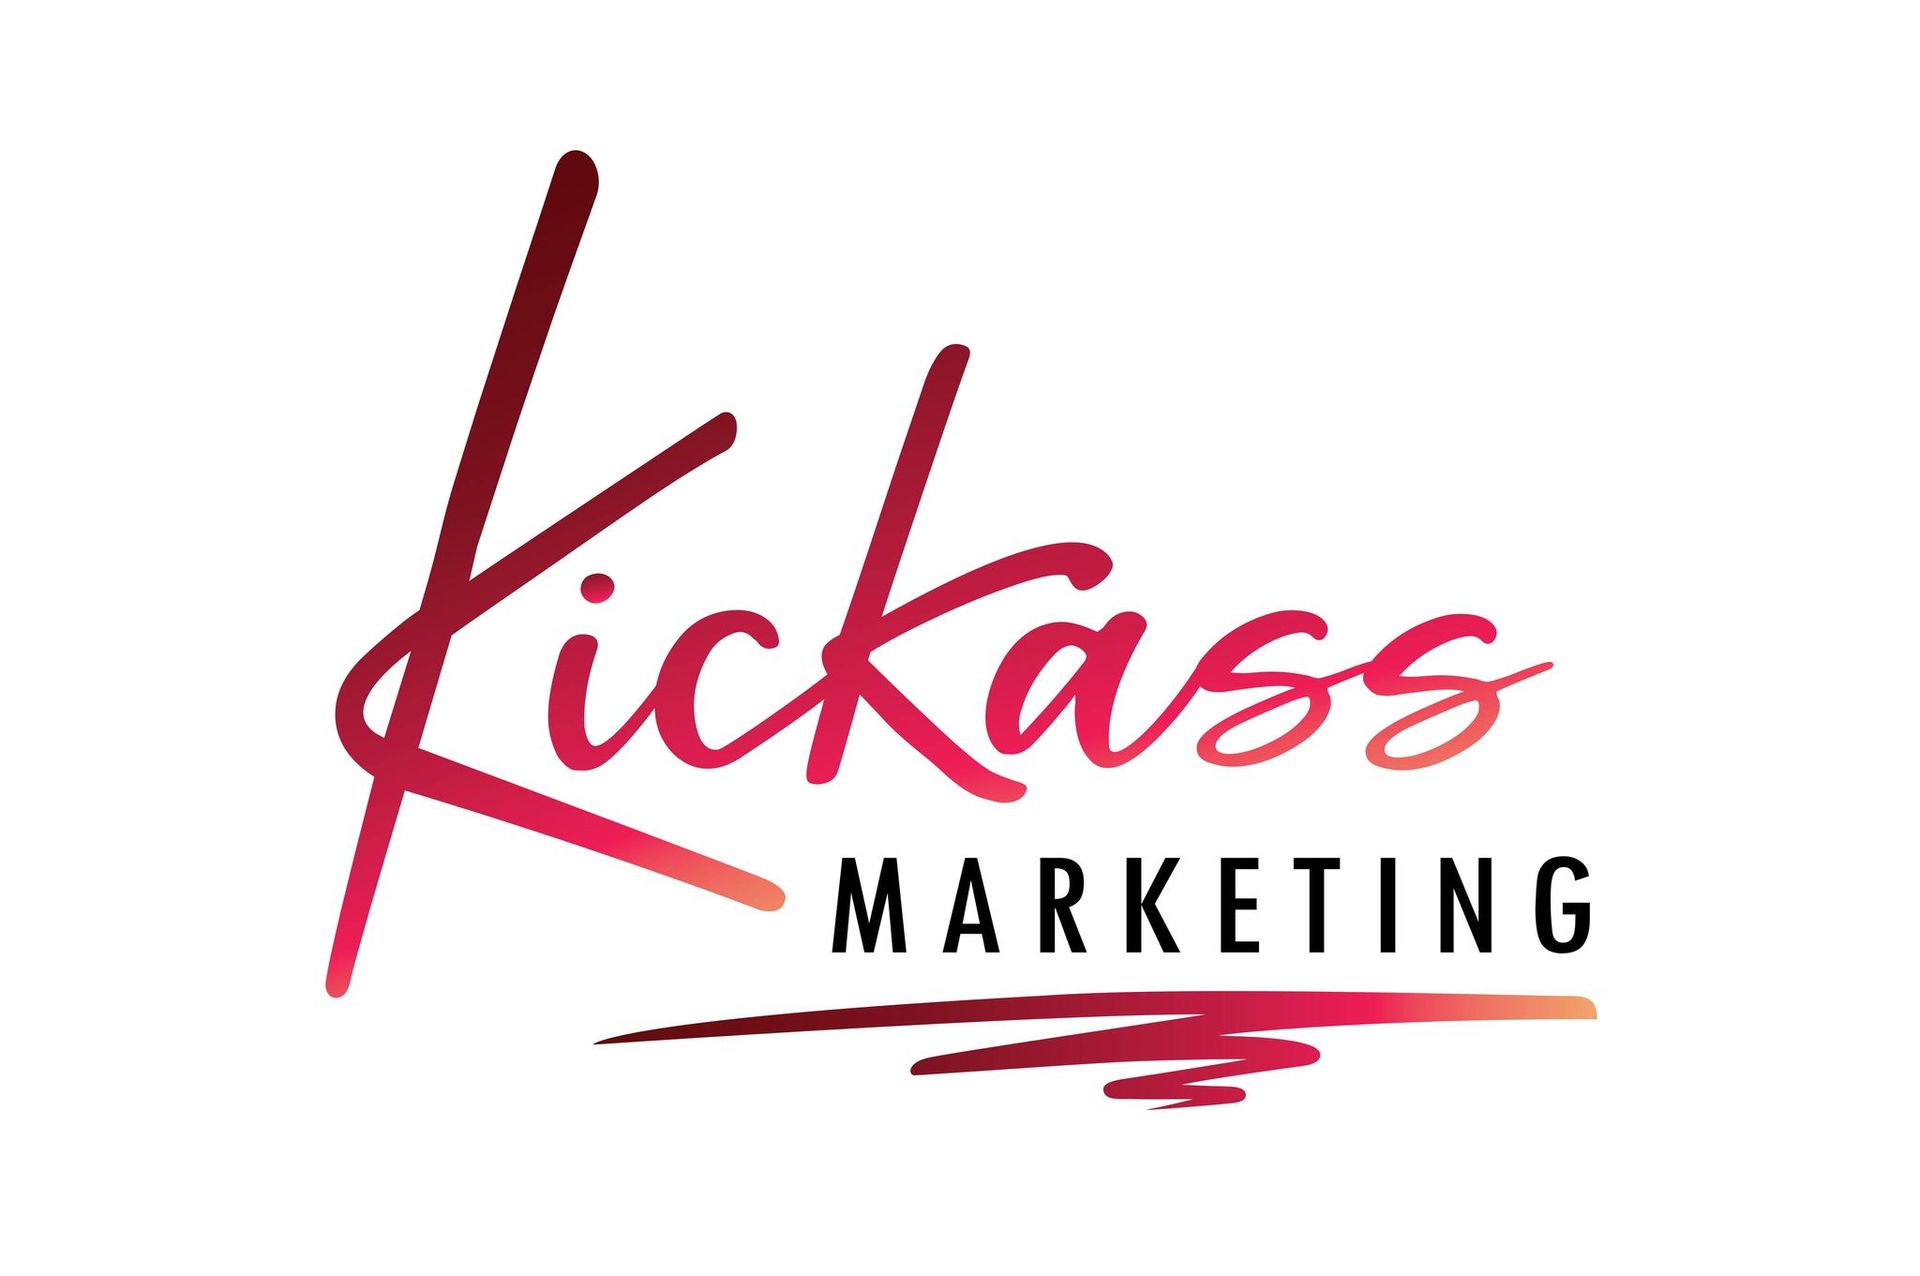 the logo for kickass marketing is a red and black logo with a brush stroke .